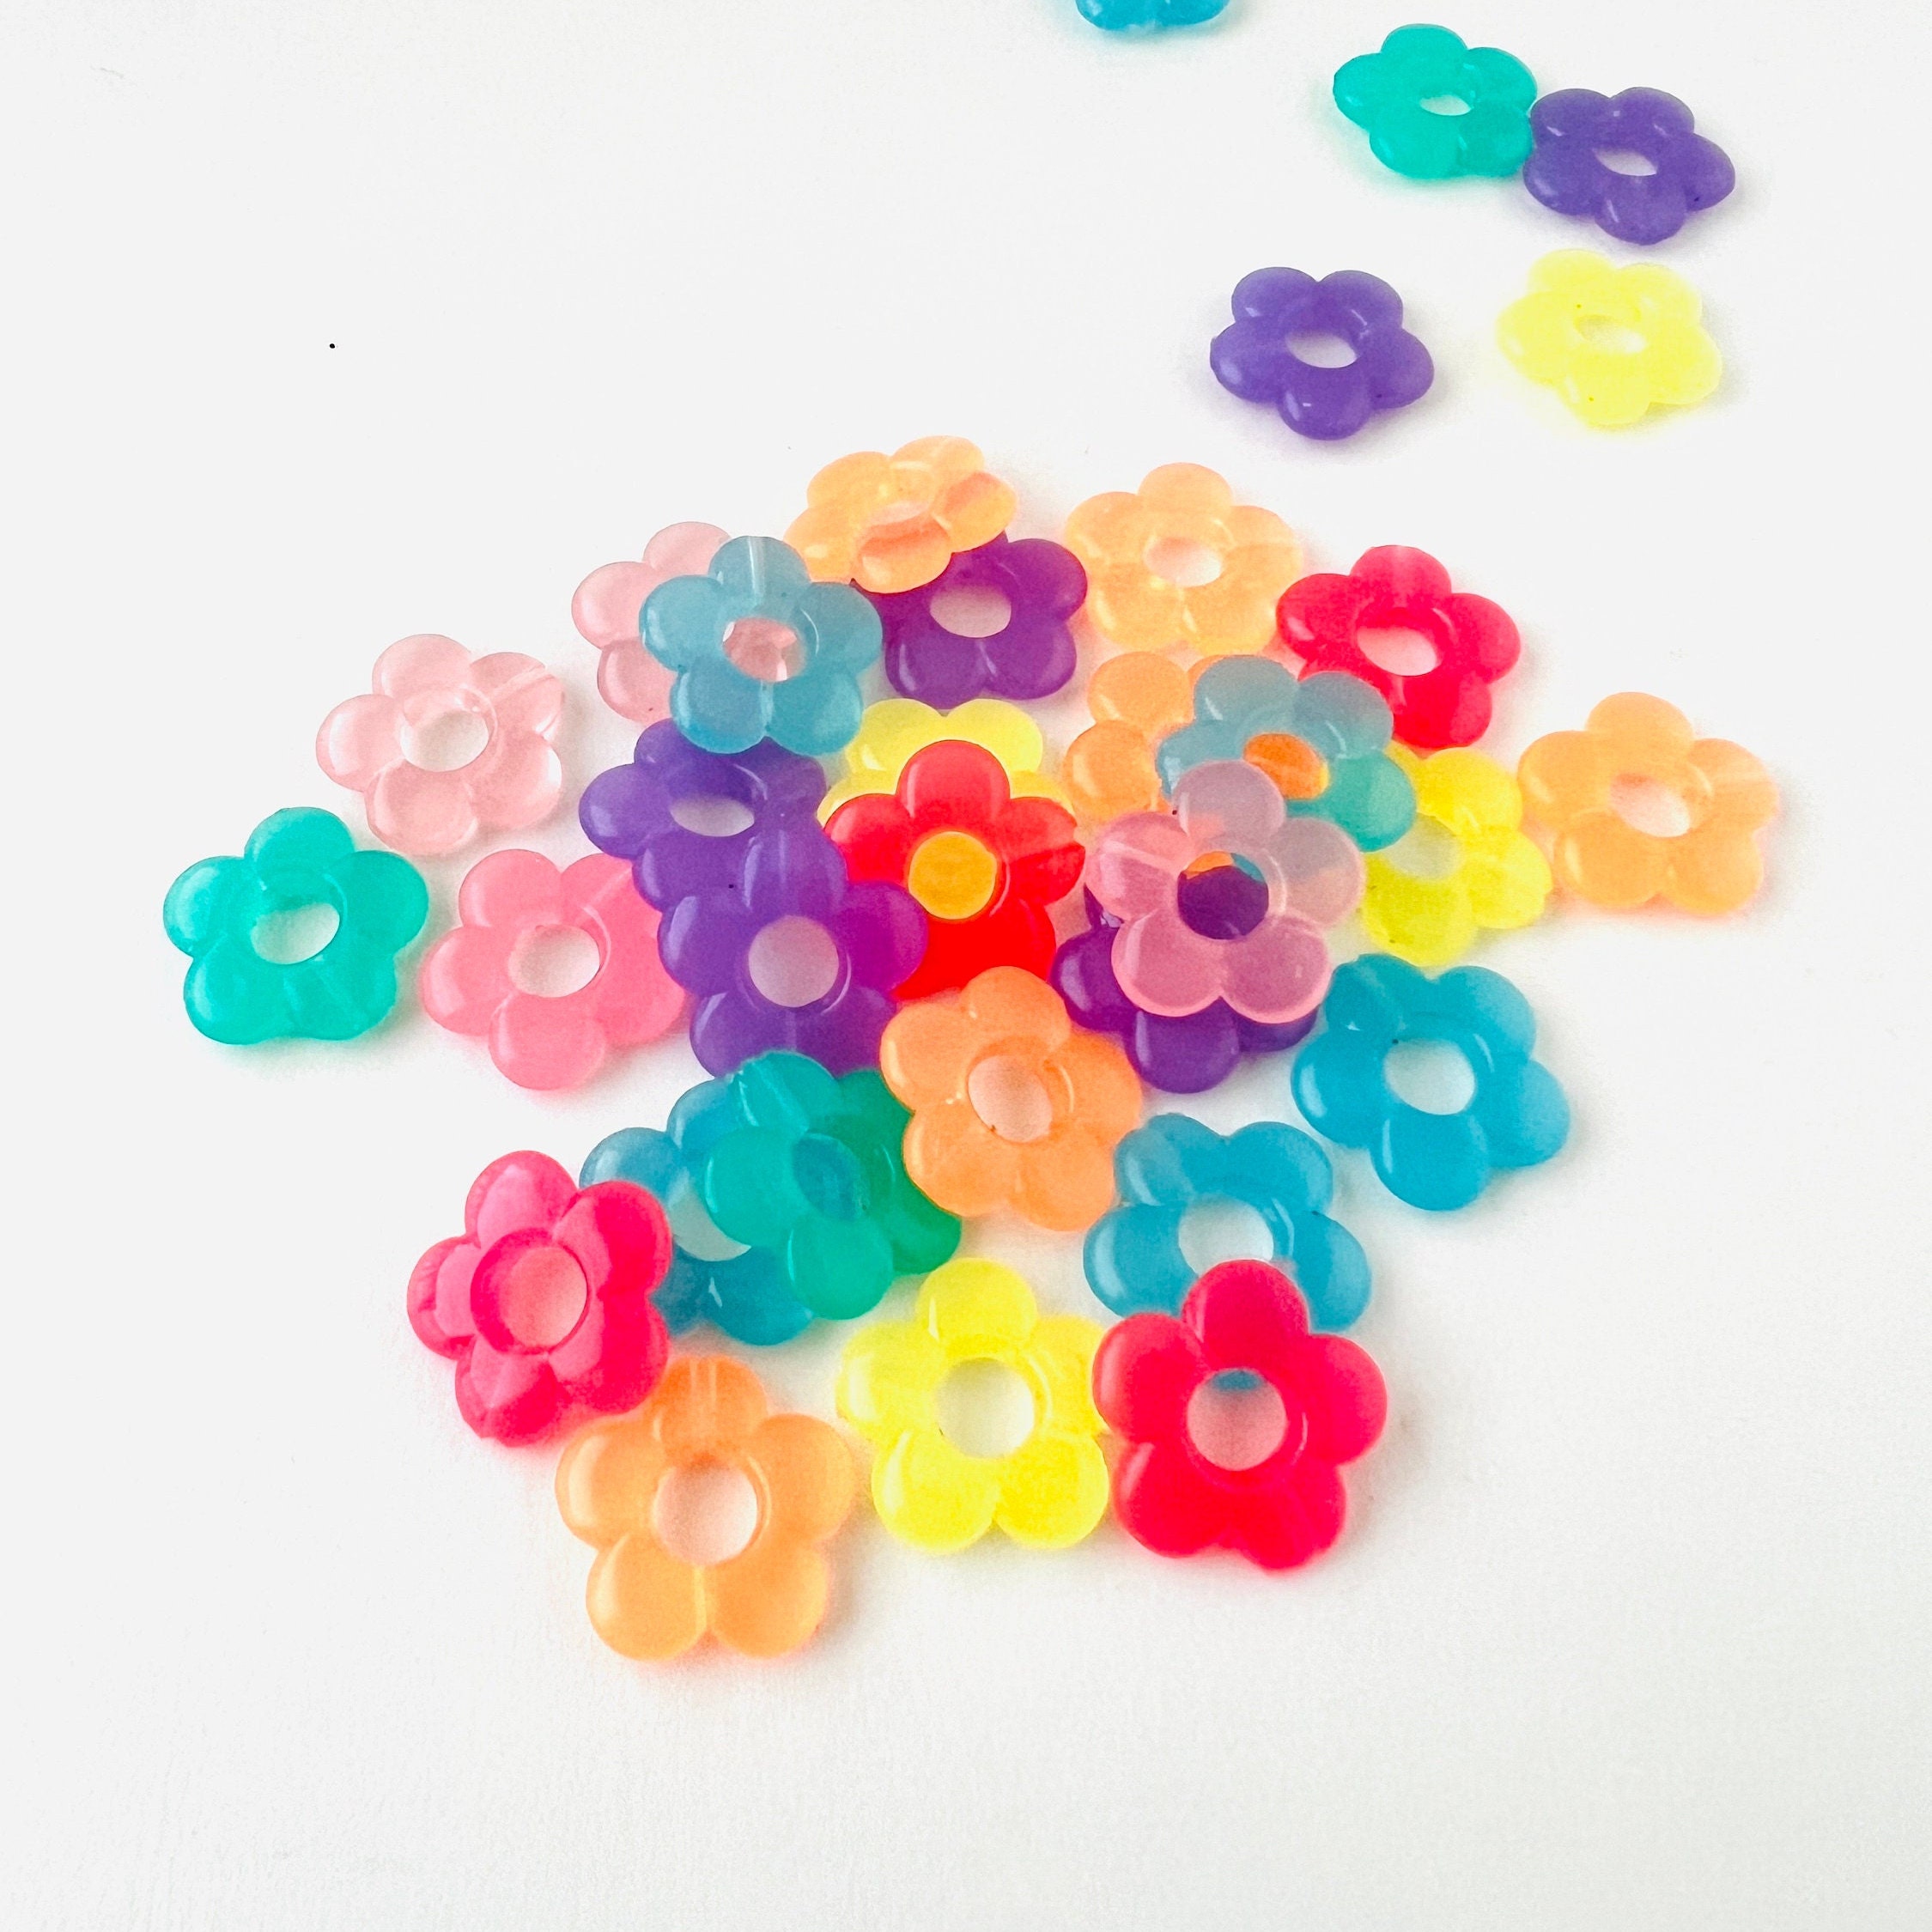 Transparent Acrylic Flower Beads in Assorted Styles and Colors, Clear  Colorful Vintage Themed Floral Mixed Lot, 6mm to 27mm Size Assortment 